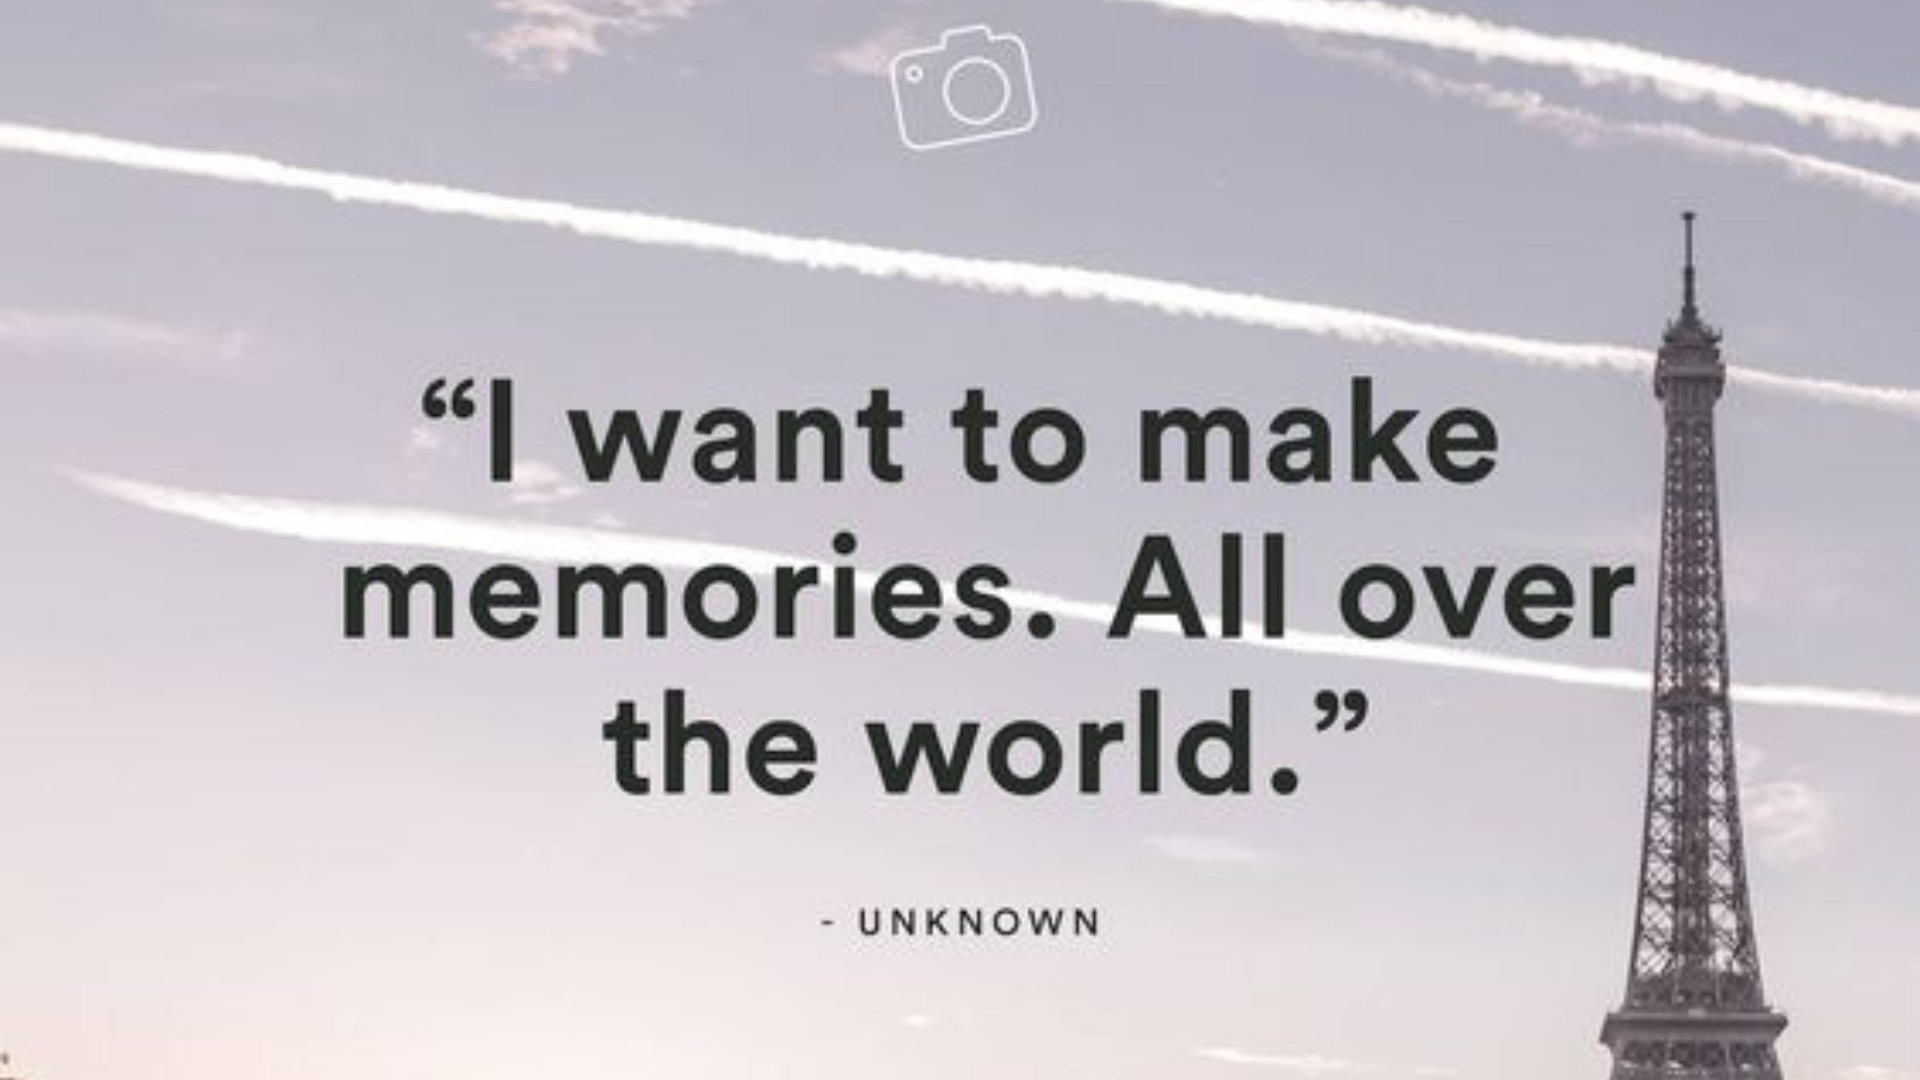 What’s your motivation to travel?